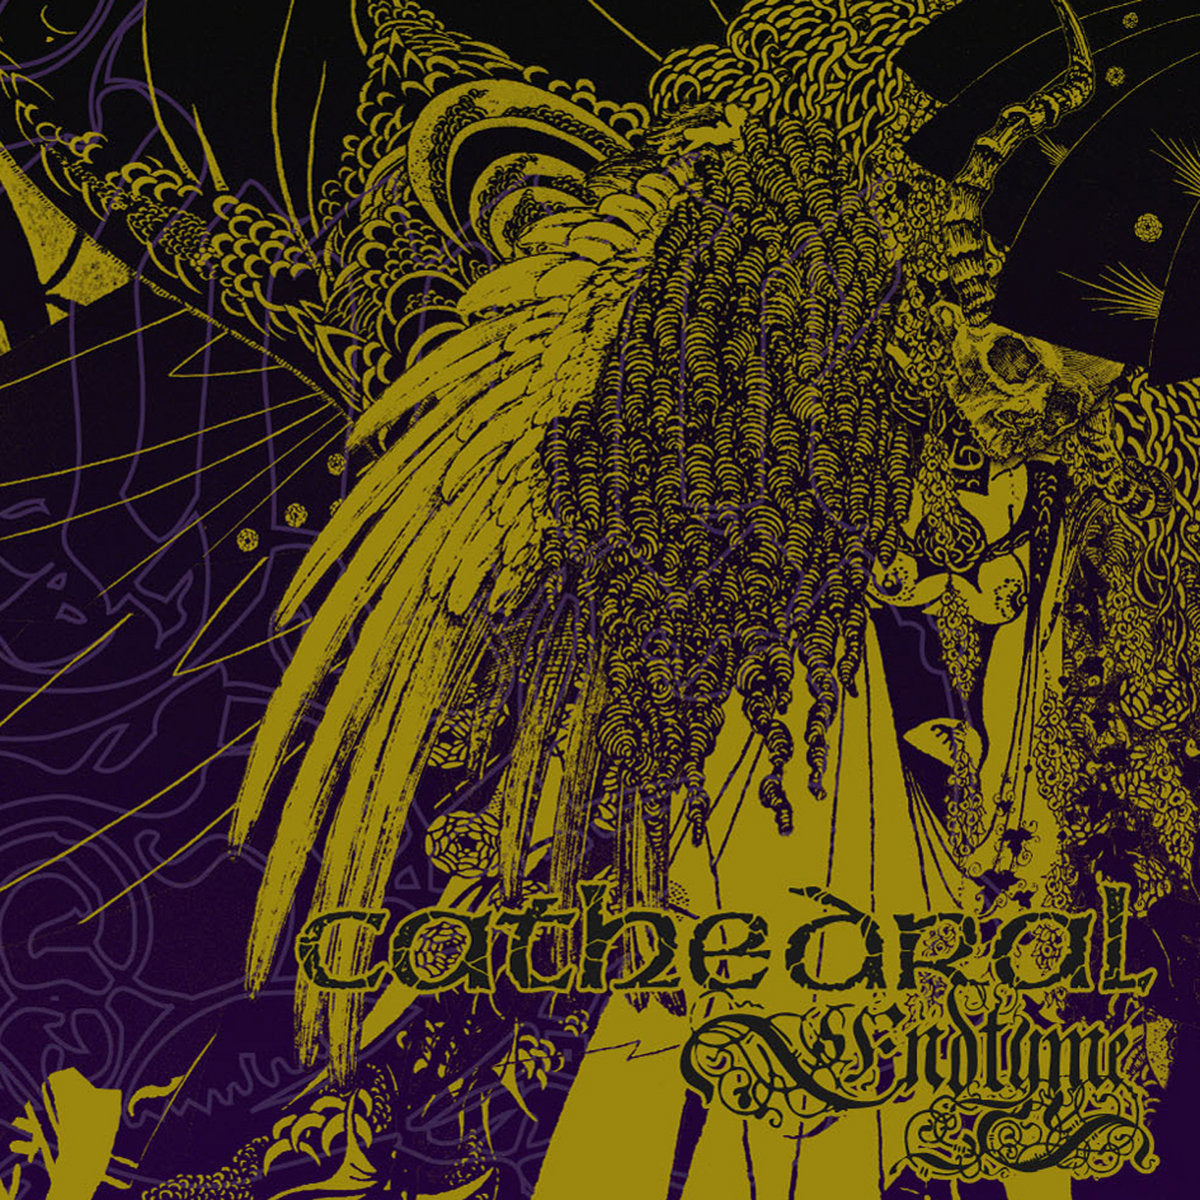 Cathedral "Endtyme" Gatefold 2x12" Blue Vinyl - IN STOCK NOW!